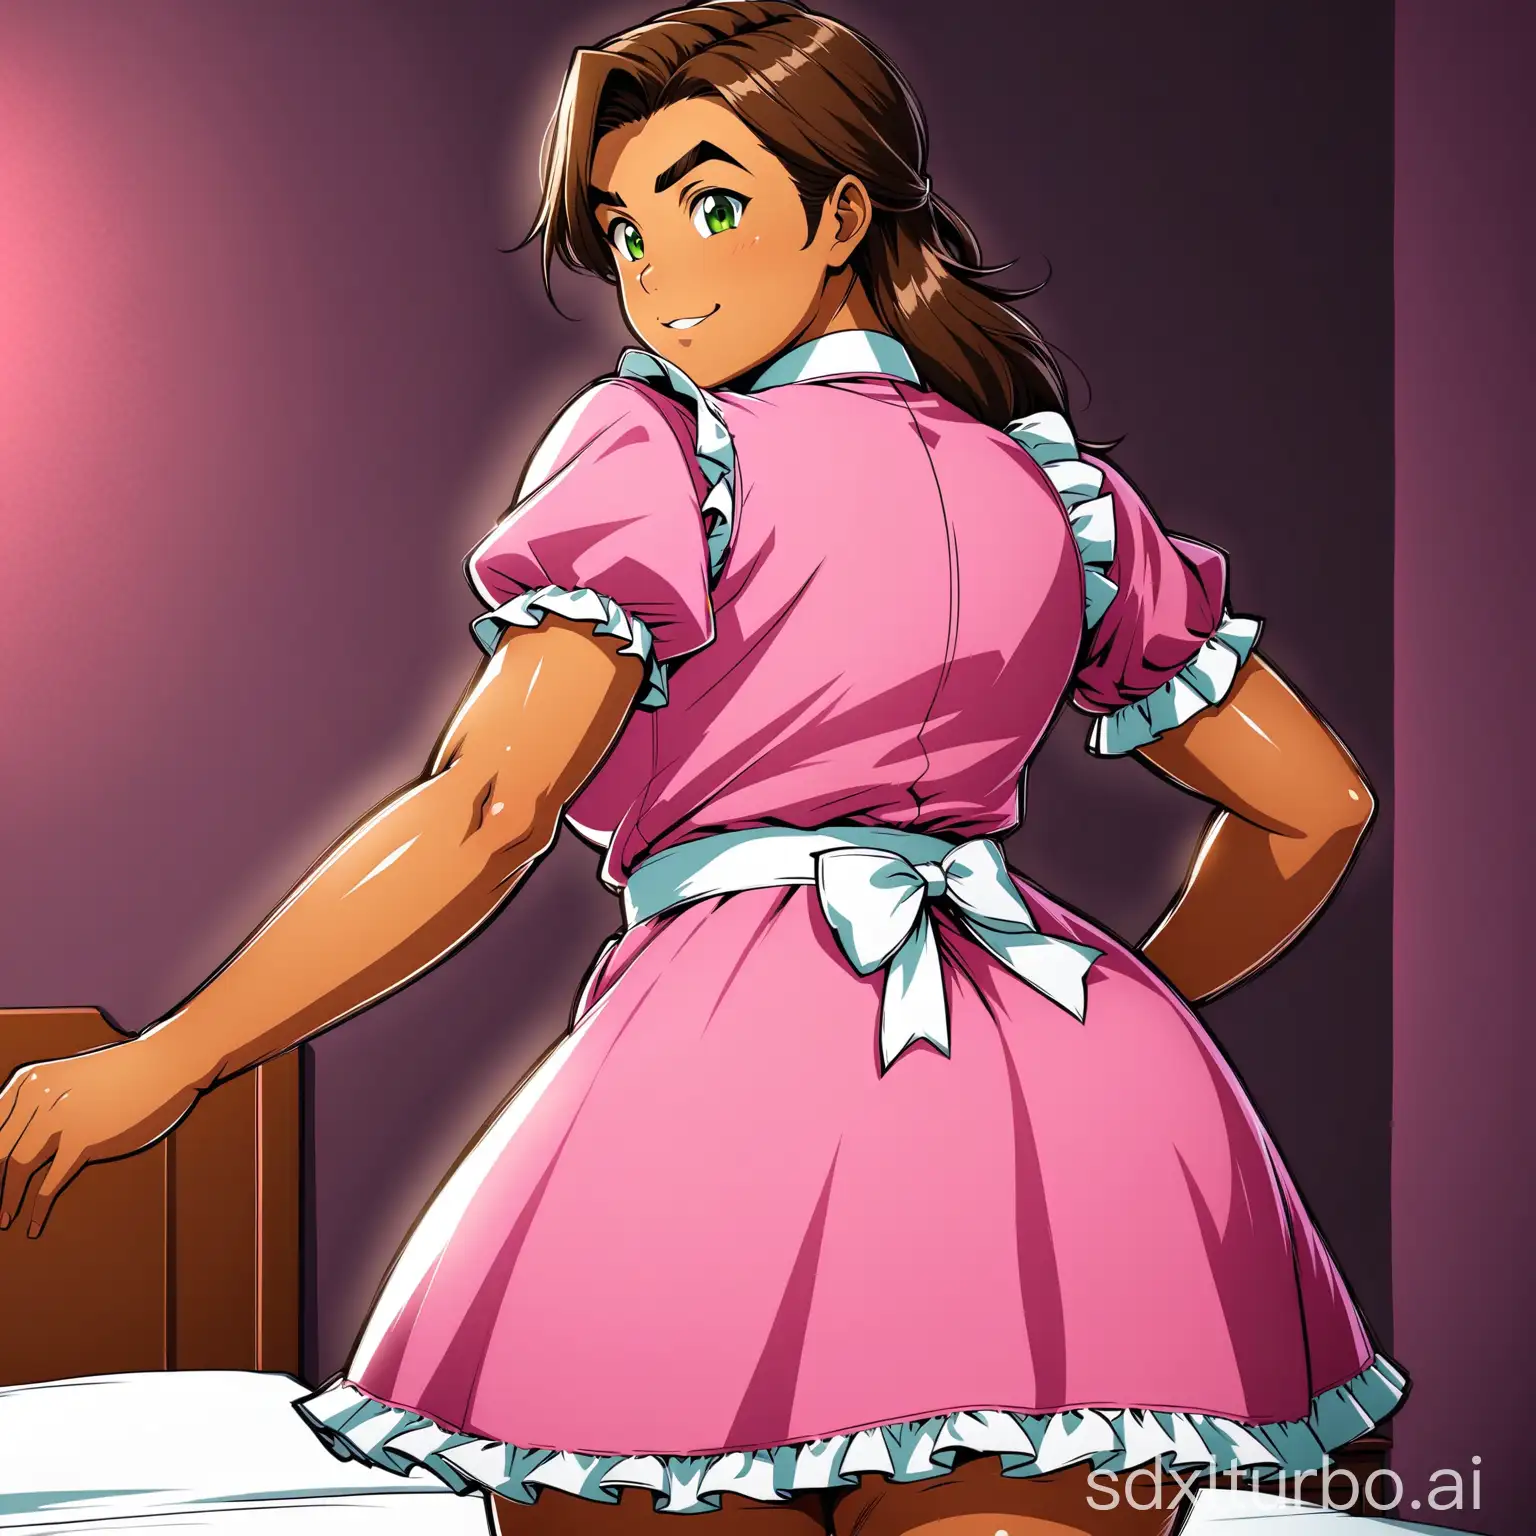 Chubby-Young-Man-in-Pink-Maid-Uniform-Dancing-in-Dark-Bedroom